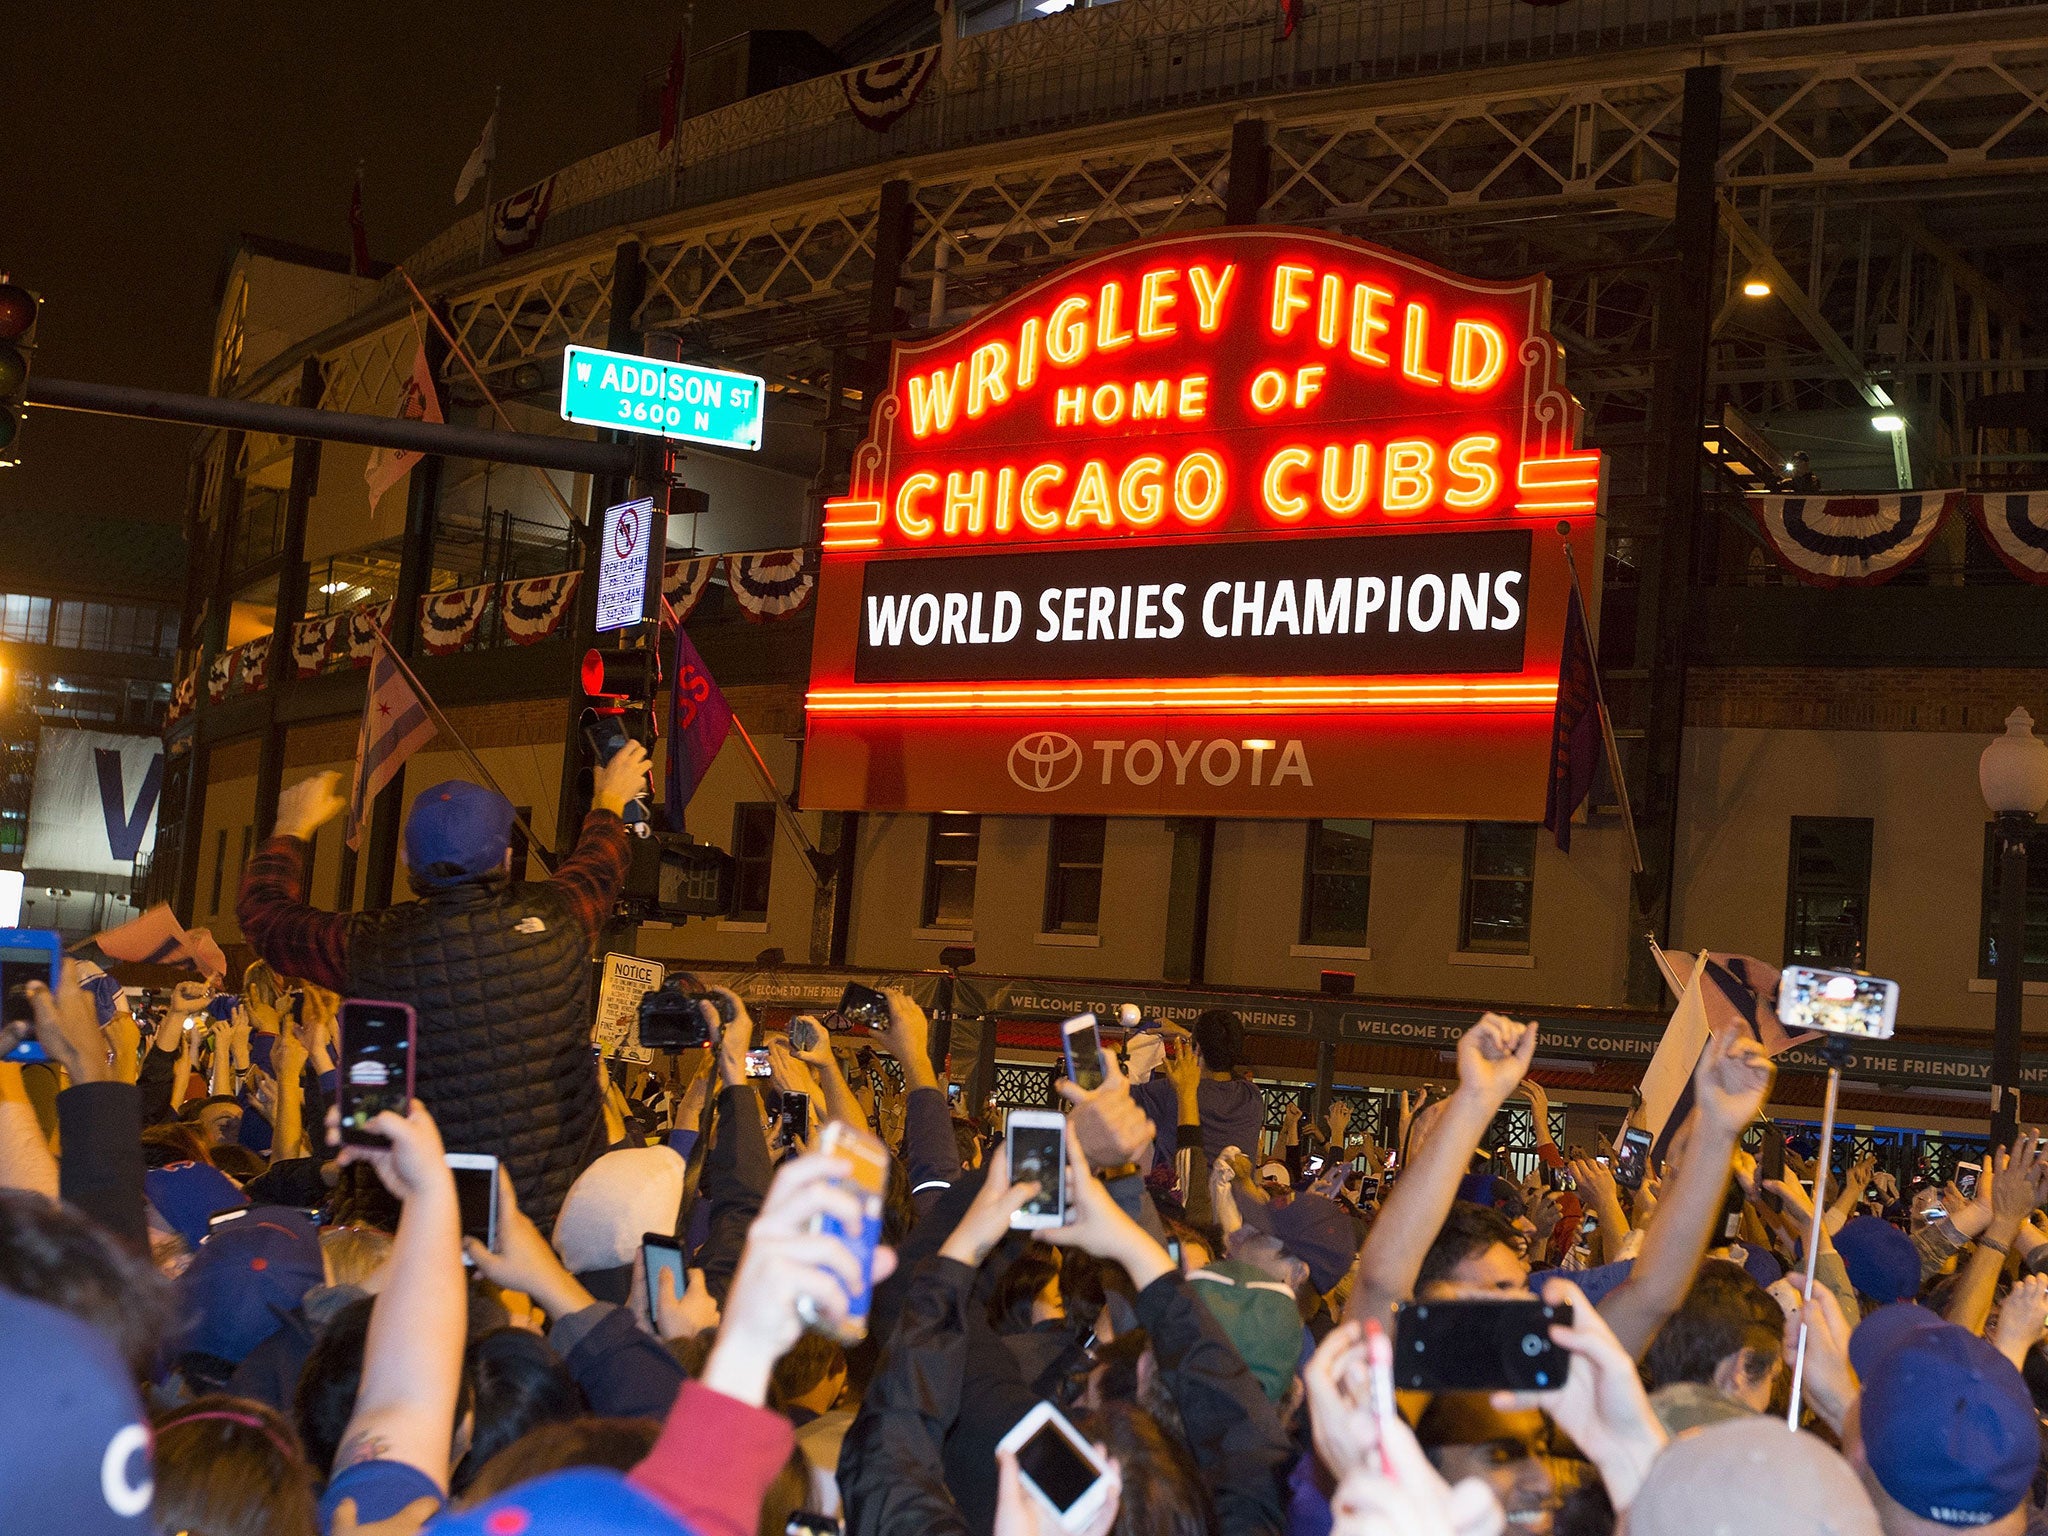 The Cubs made history after winning the World Series for the first time in 108 years